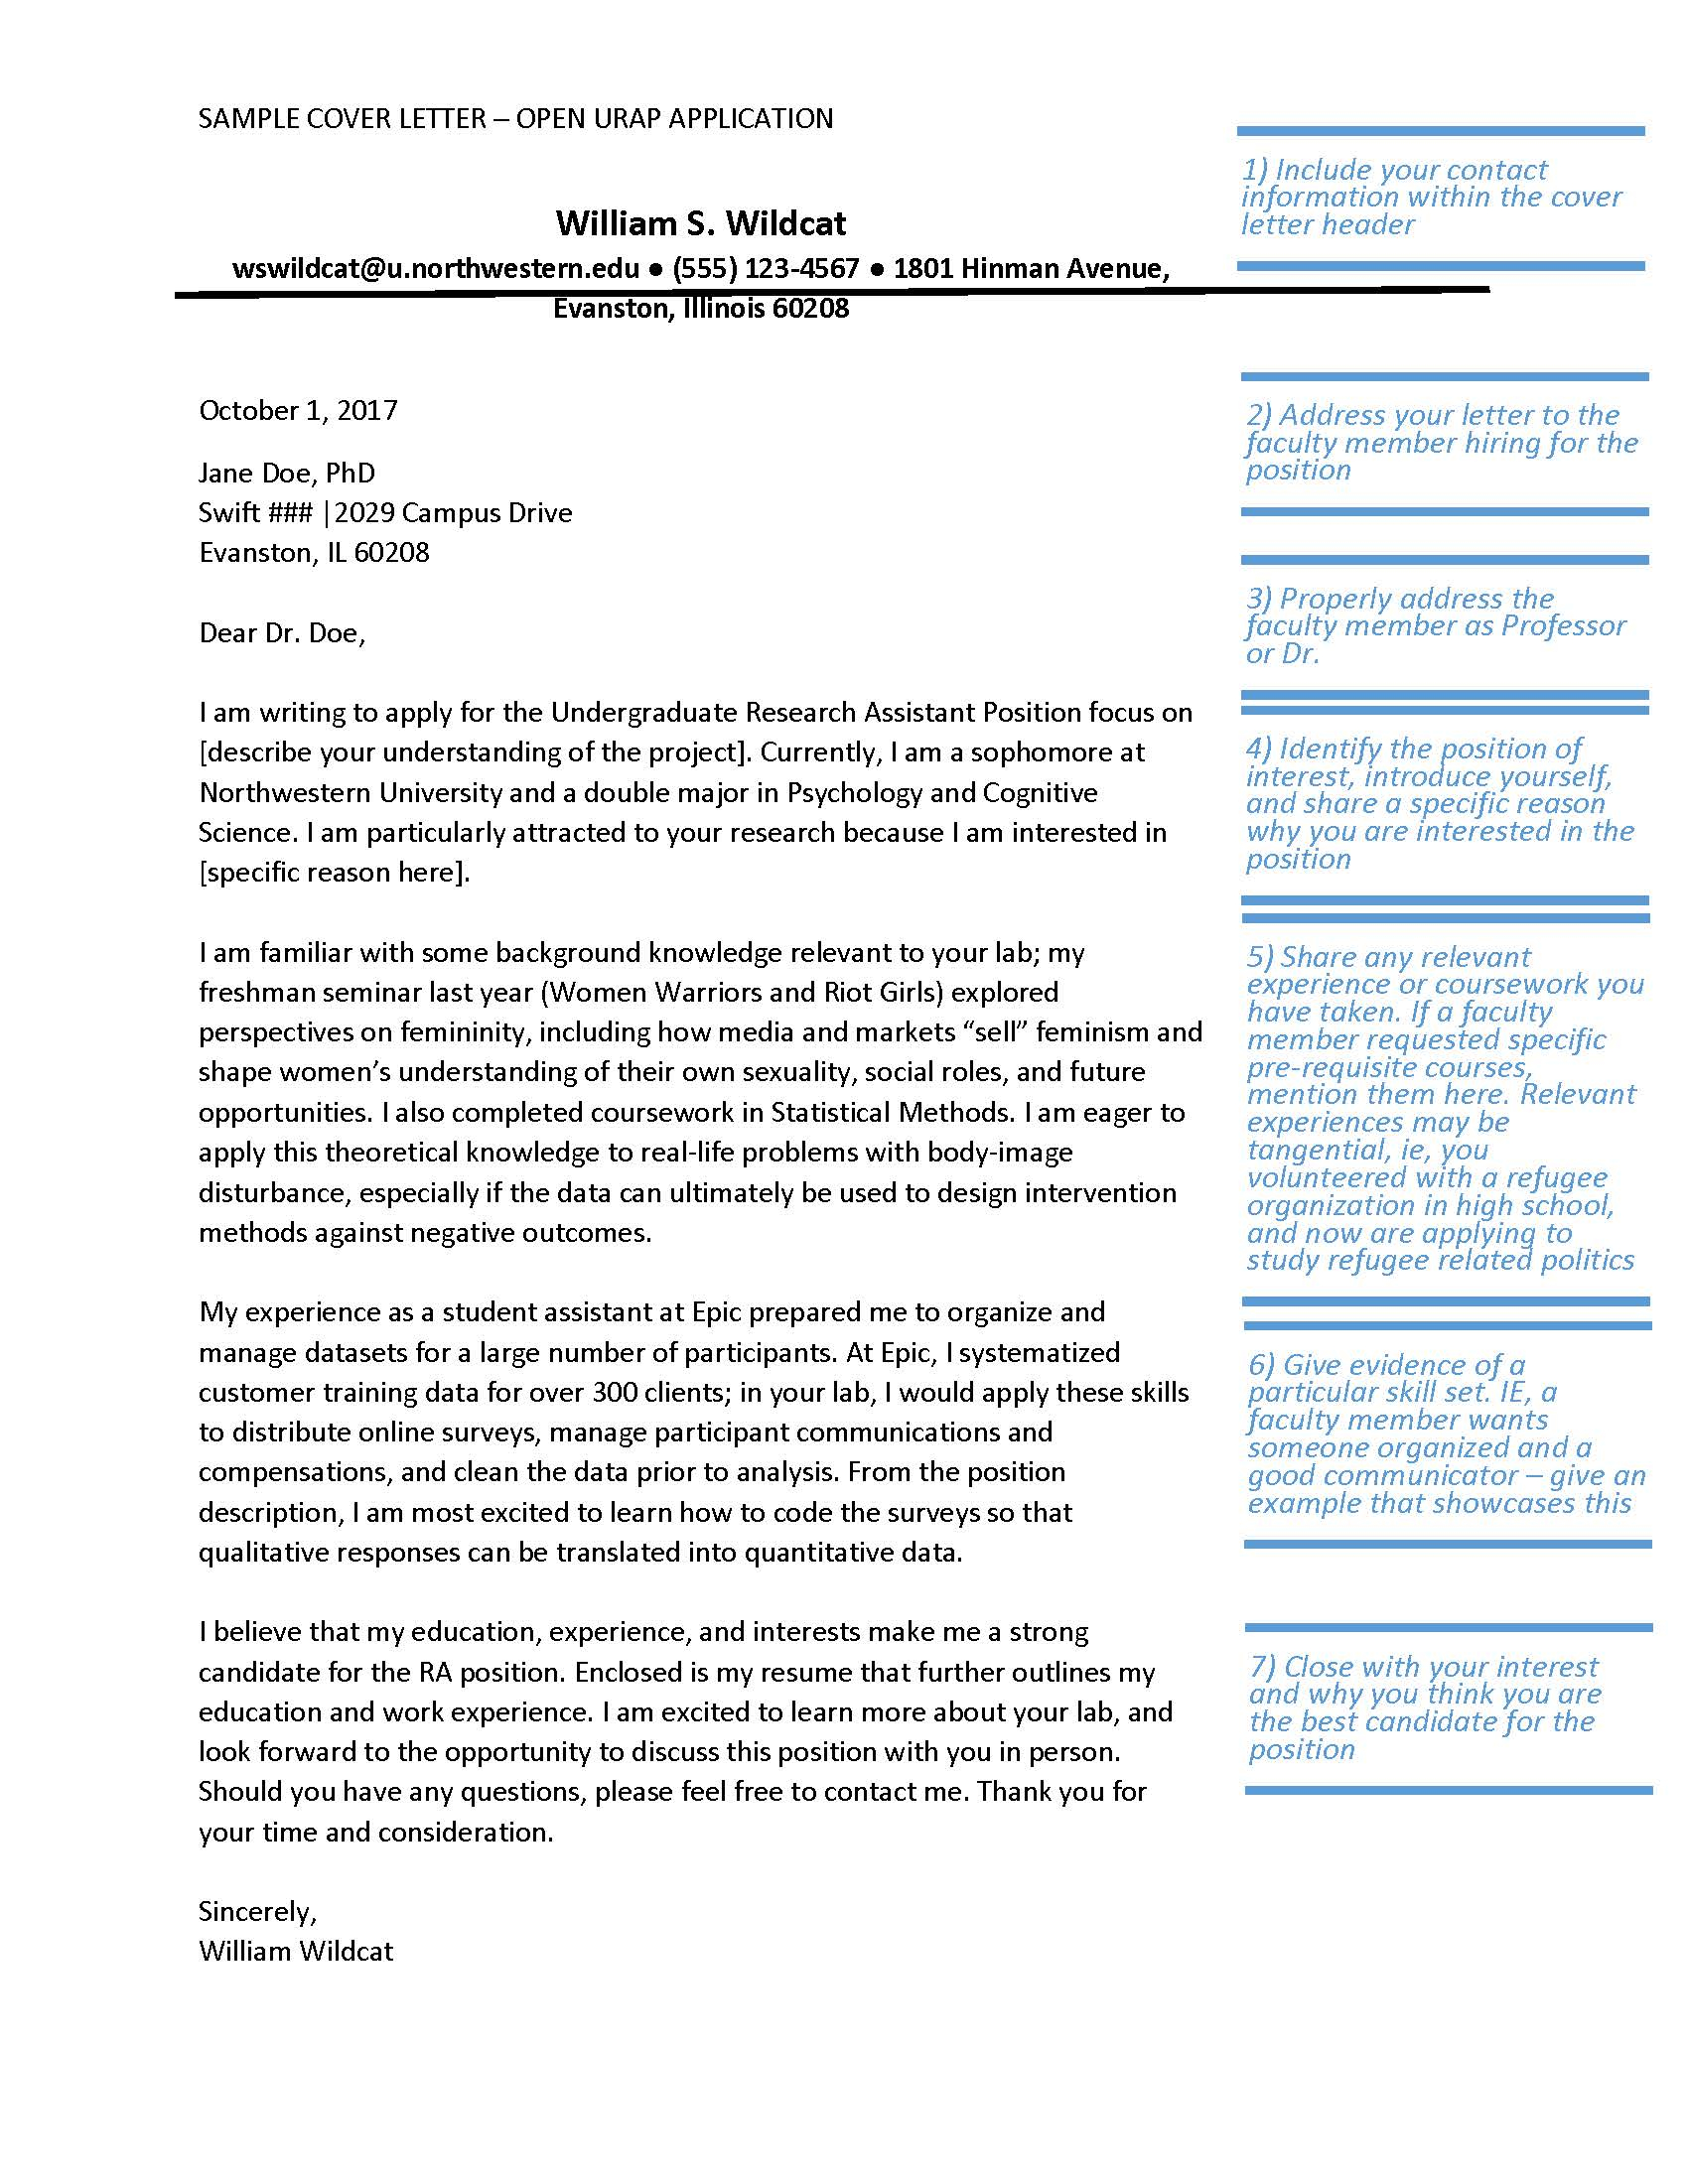 Example Cover Letter Example Cover Letter For Open Urap Position Office Of